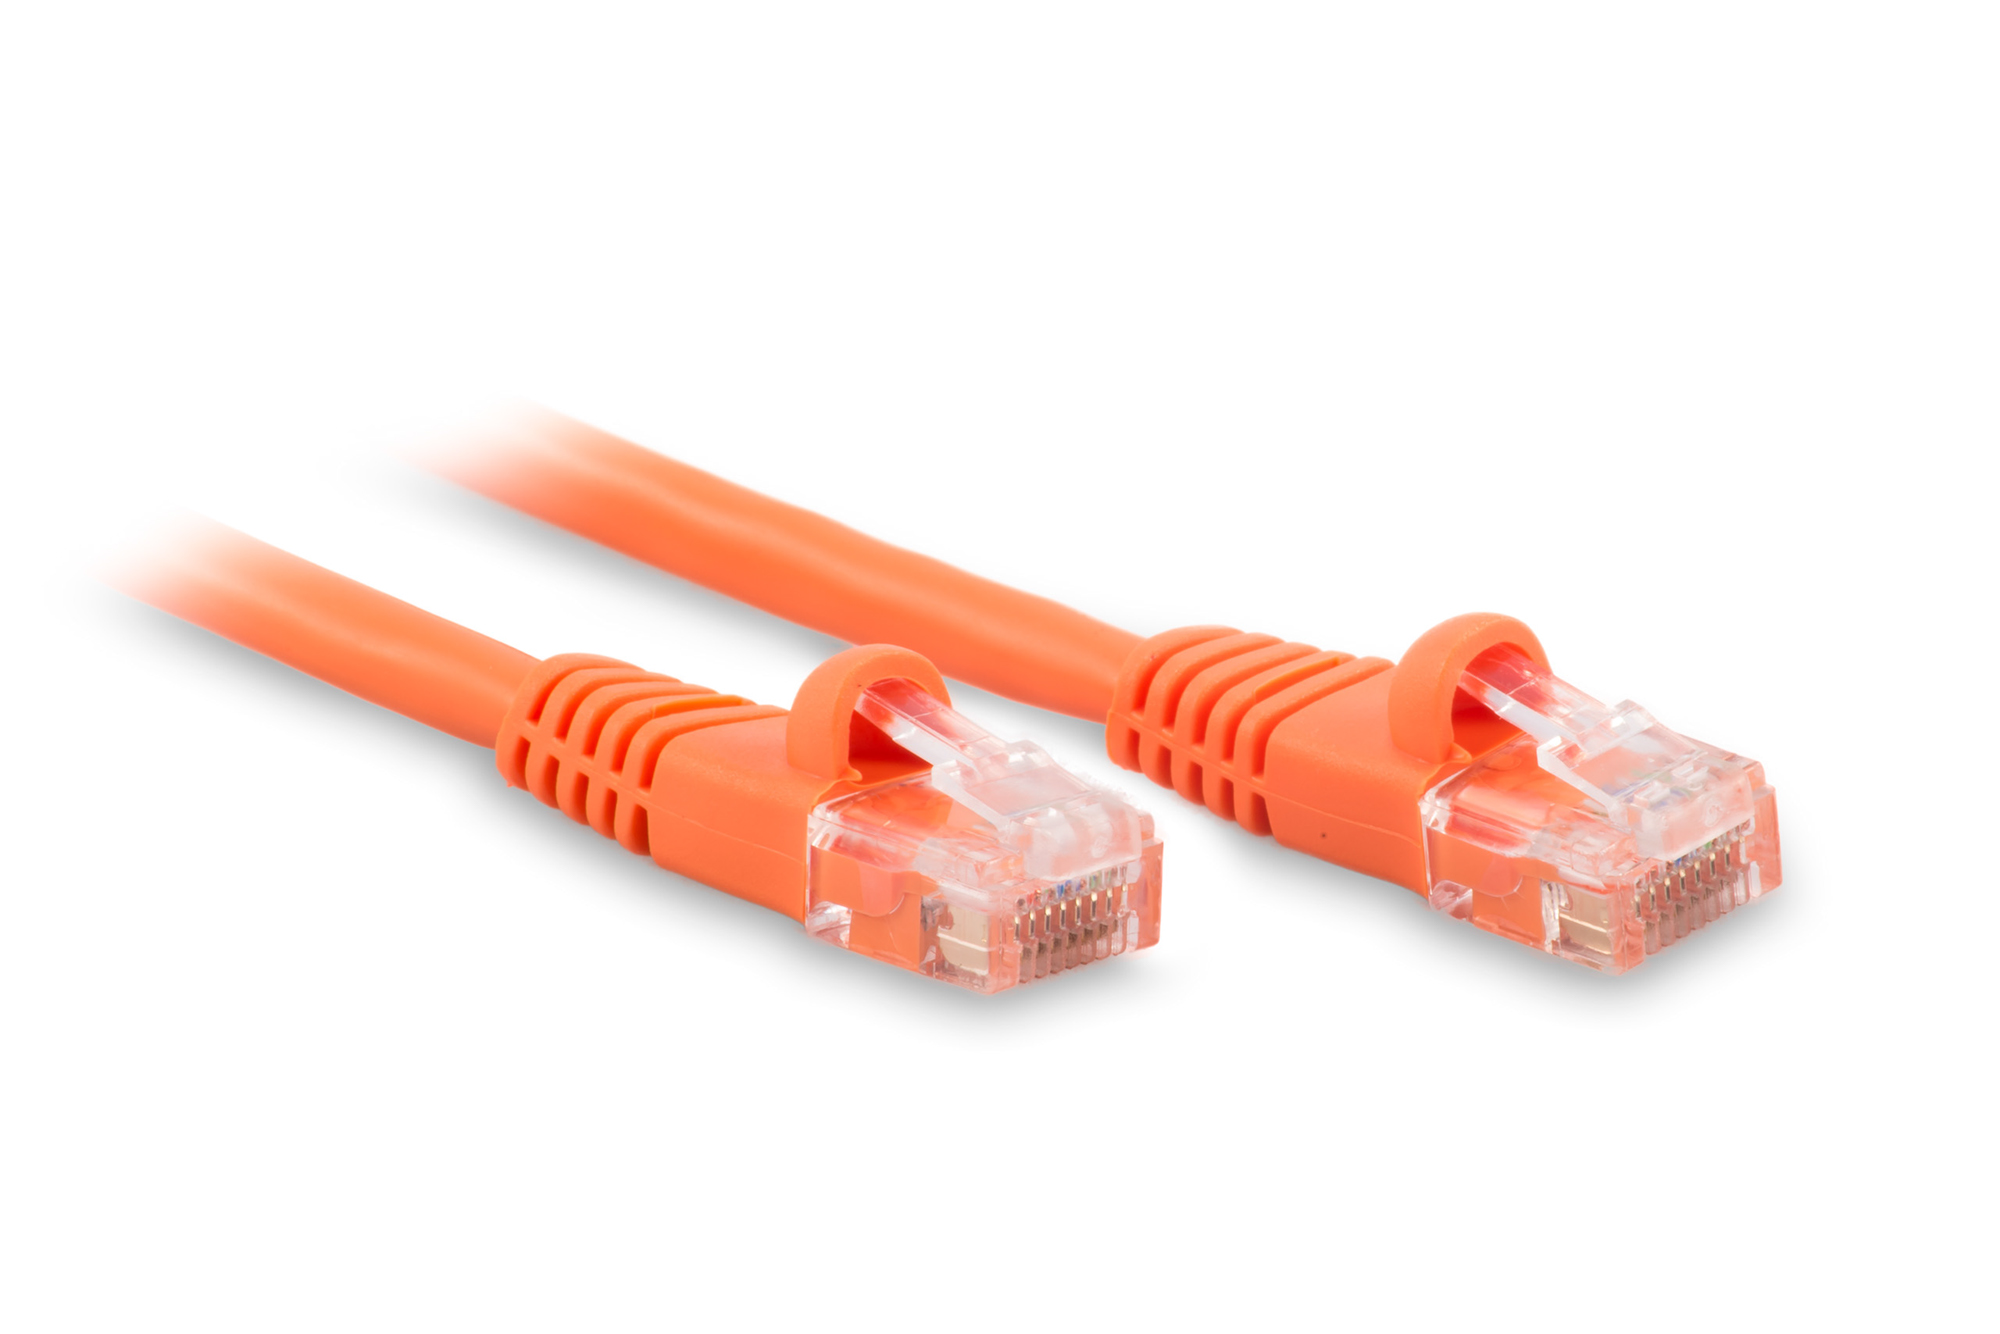 5ft Cat6 Ethernet Patch Cable - Orange Color - Snagless Boot